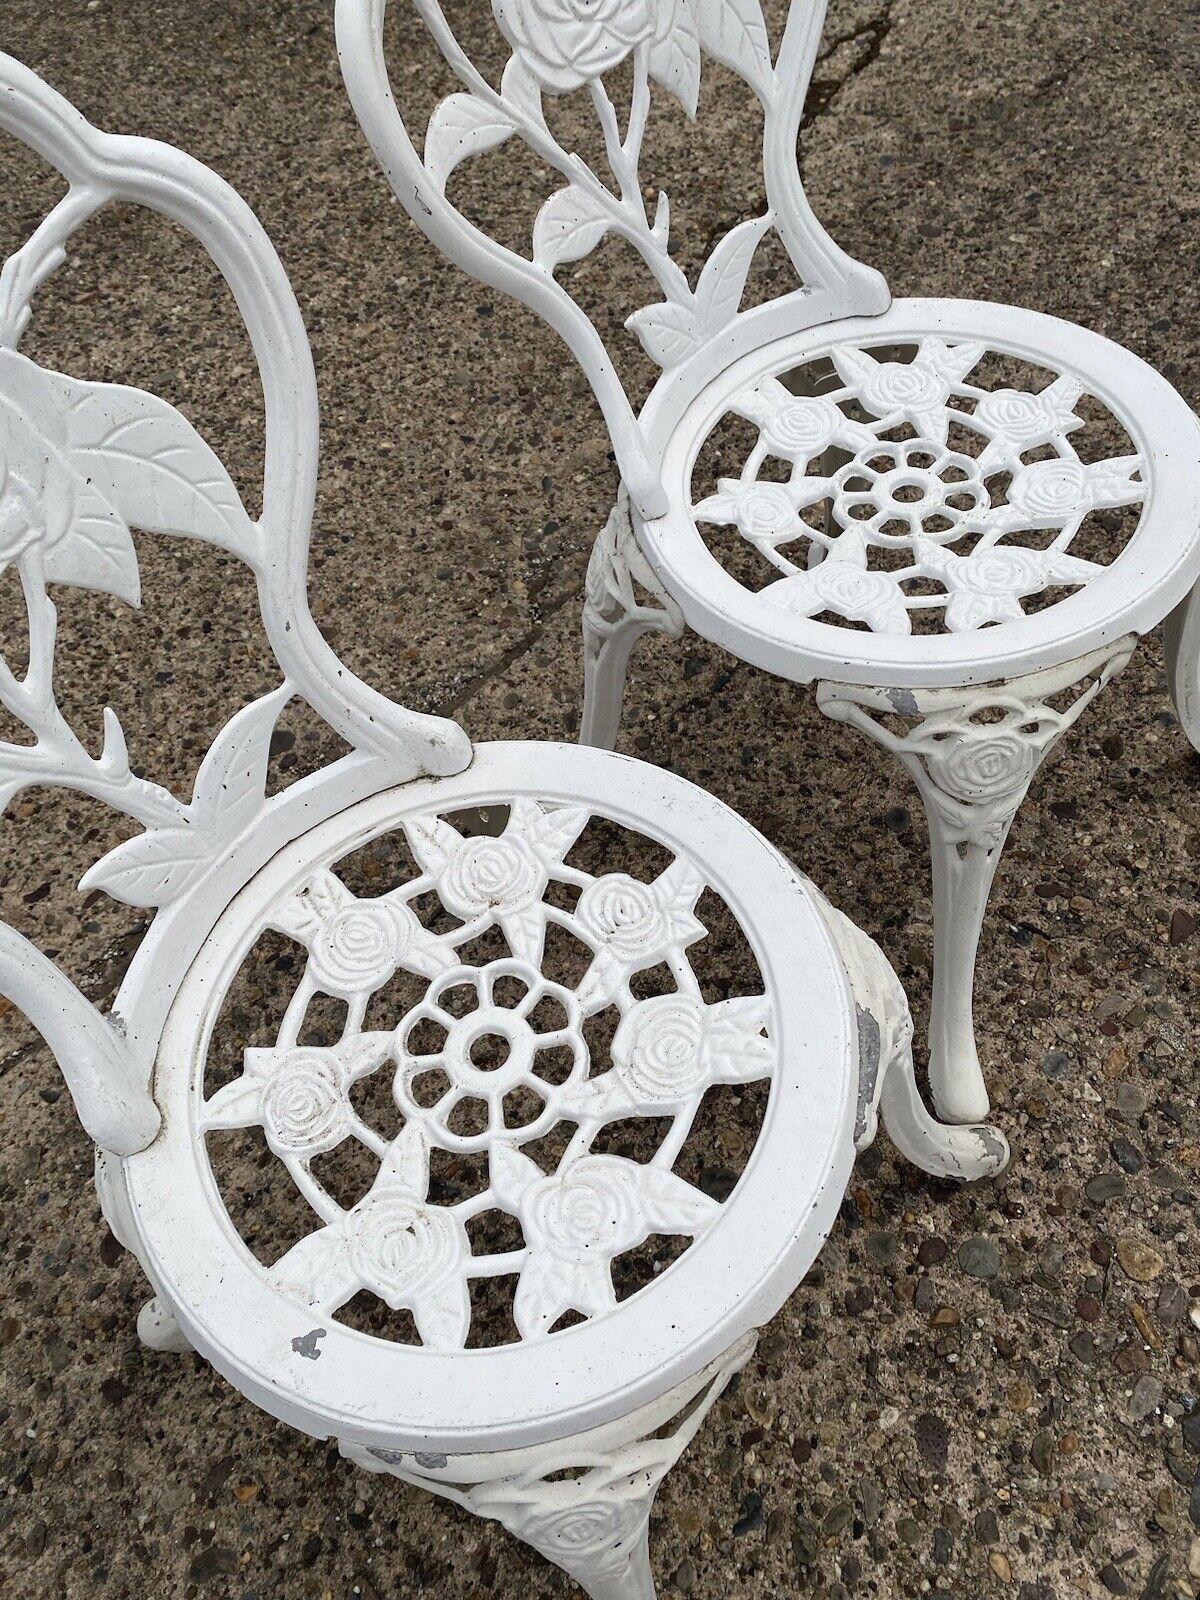 Victorian Style Rose Pattern Cast Aluminum Garden Patio Outdoor Bistro Chairs In Good Condition For Sale In Philadelphia, PA